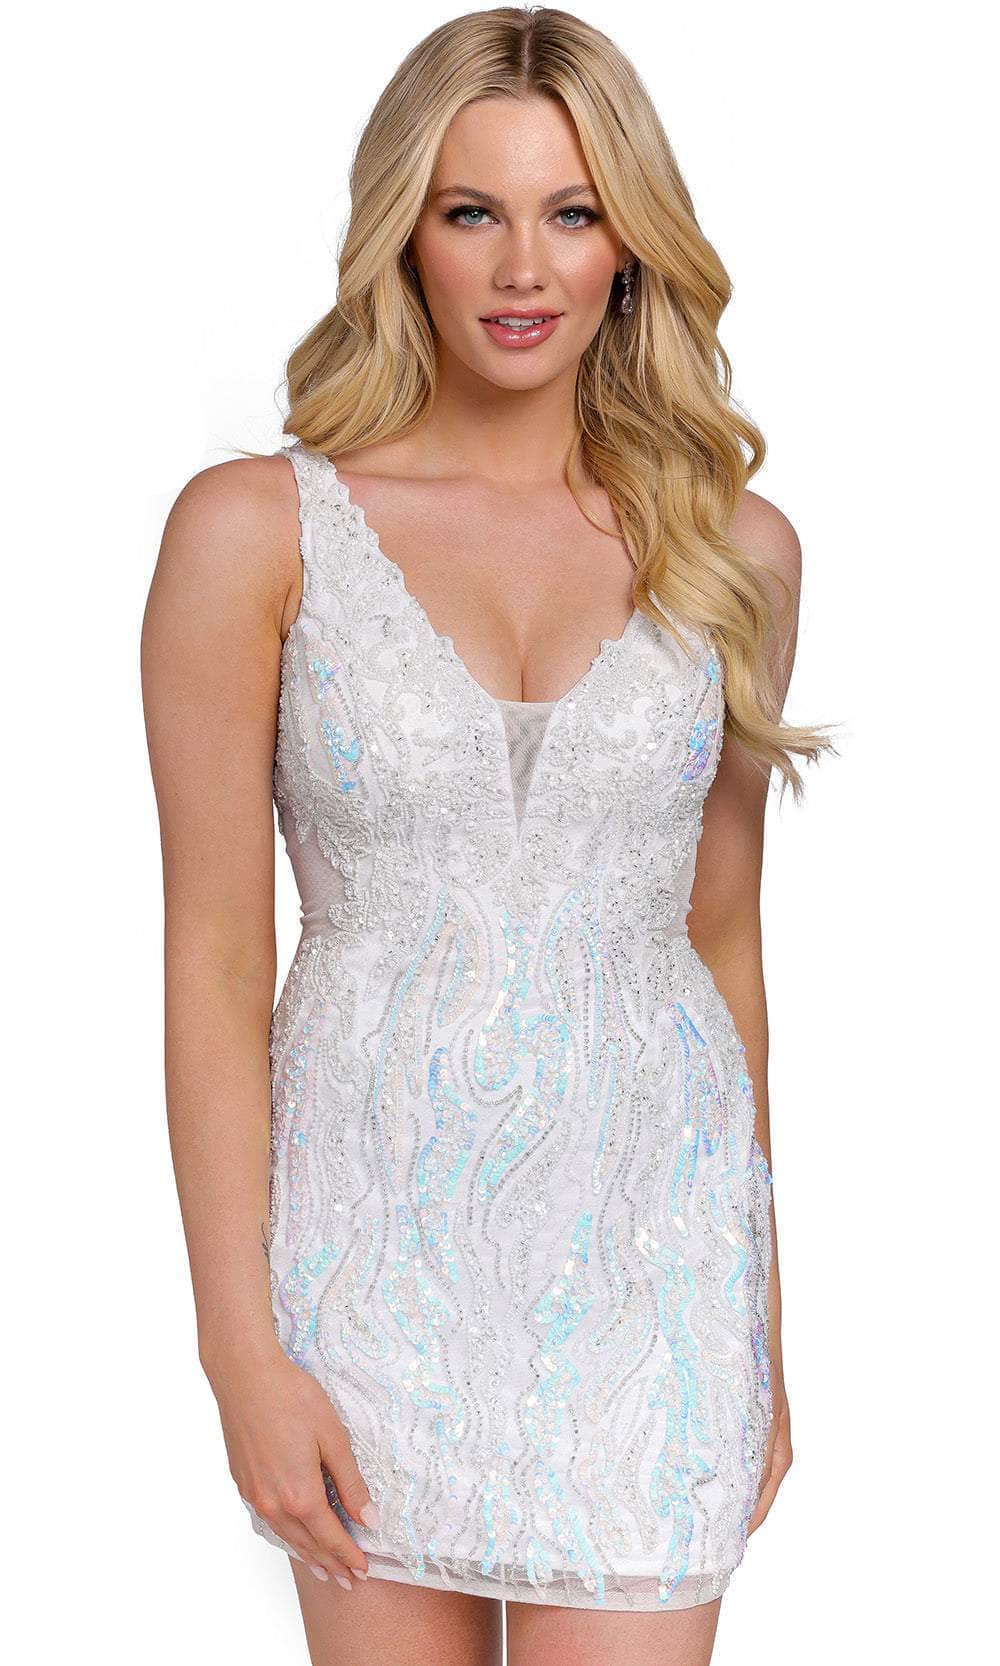 Primavera Couture 3822 - Embroidered Beaded Cocktail Dress Special Occasion Dress 00 / Ivory